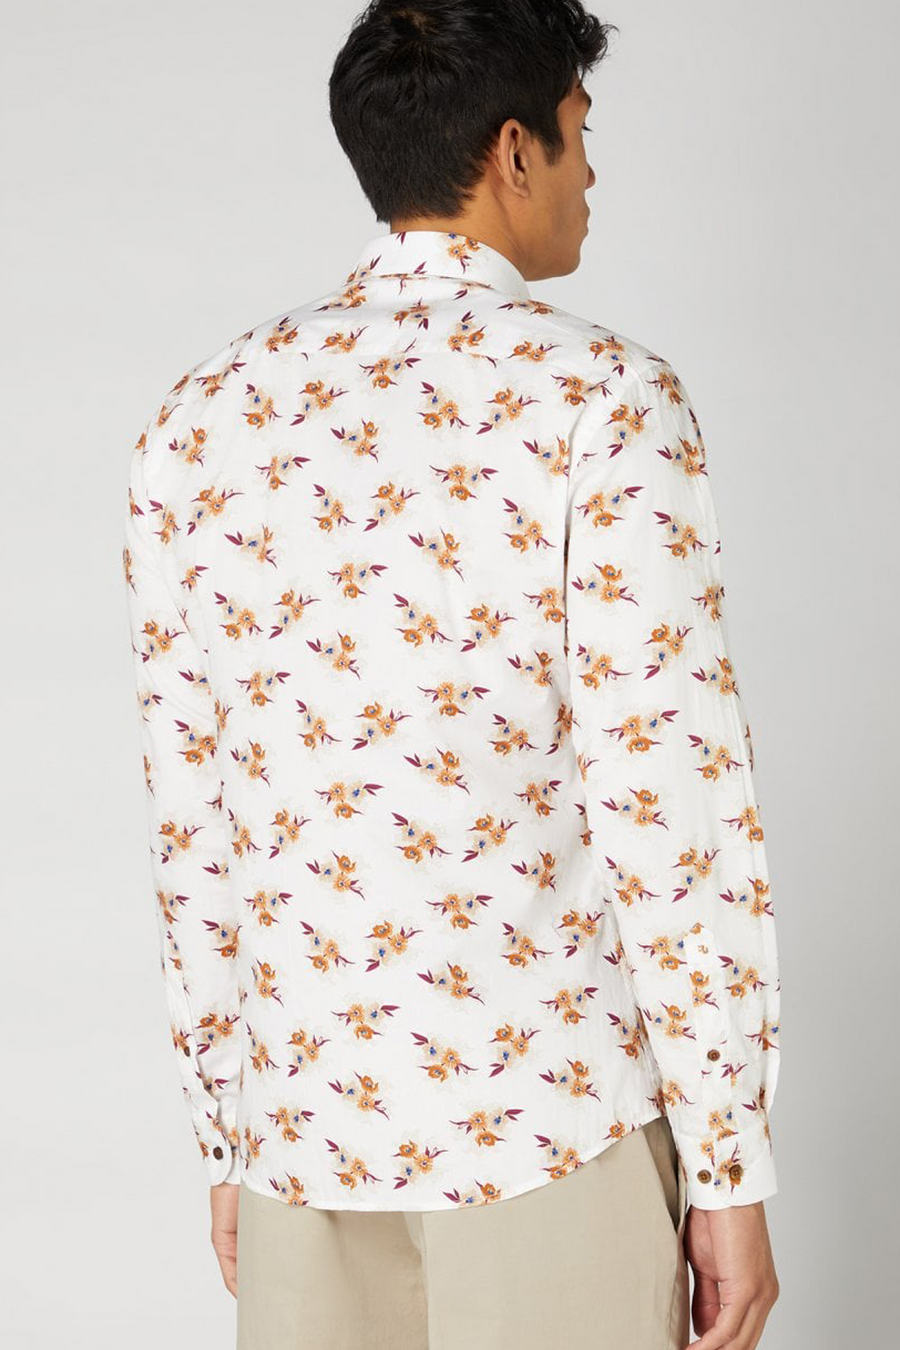 Buy the Remus Uomo Small Flower L/S Shirt White at Intro. Spend £50 for free UK delivery. Official stockists. We ship worldwide.